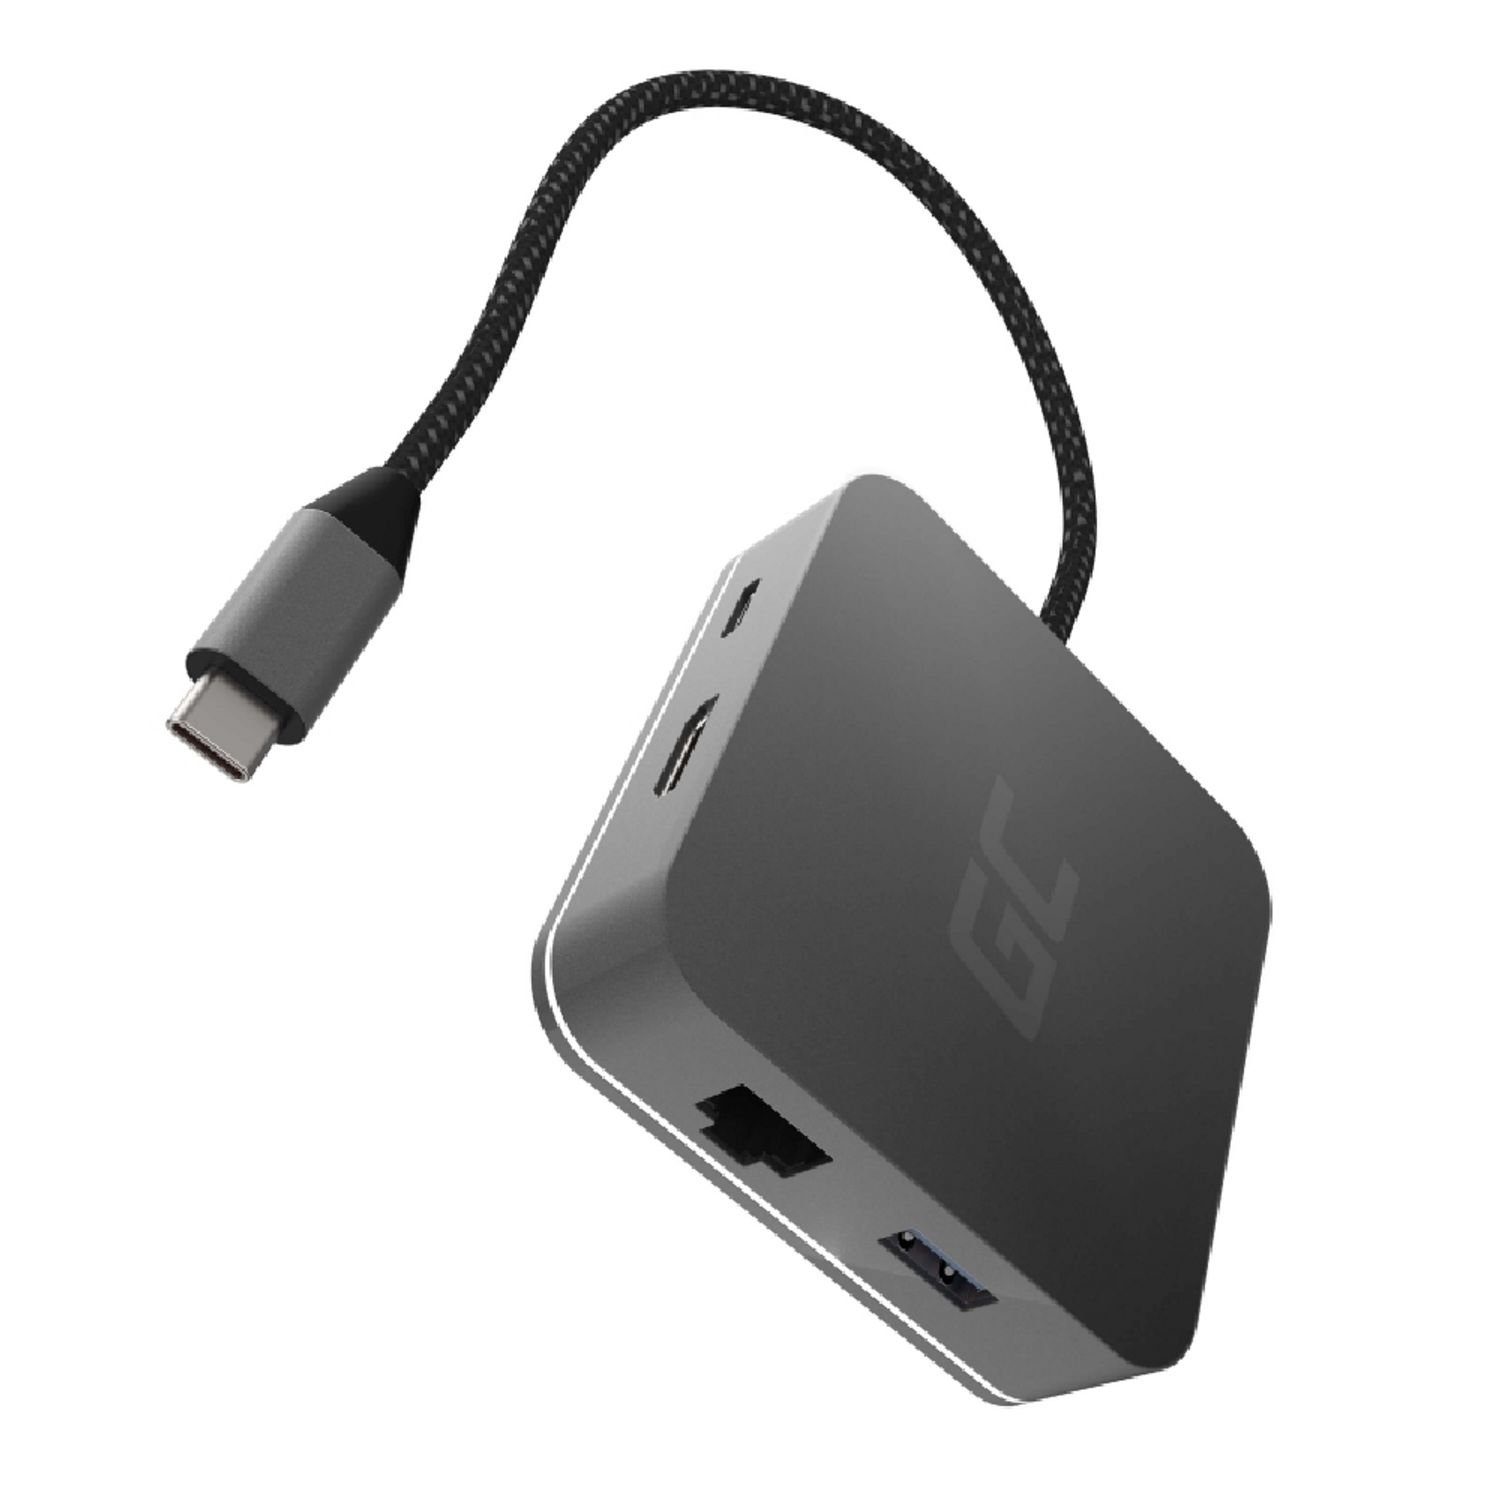 Green Cell »Docking Station HUB USB-C 6in1 Adapter (USB Quick Charge 3. 0/  4.0, HDMI, Ethernet, USB-C, für Apple MacBook, Dell XPS, Asus ZenBook and  mehr)« Netzwerk-Adapter online kaufen | OTTO